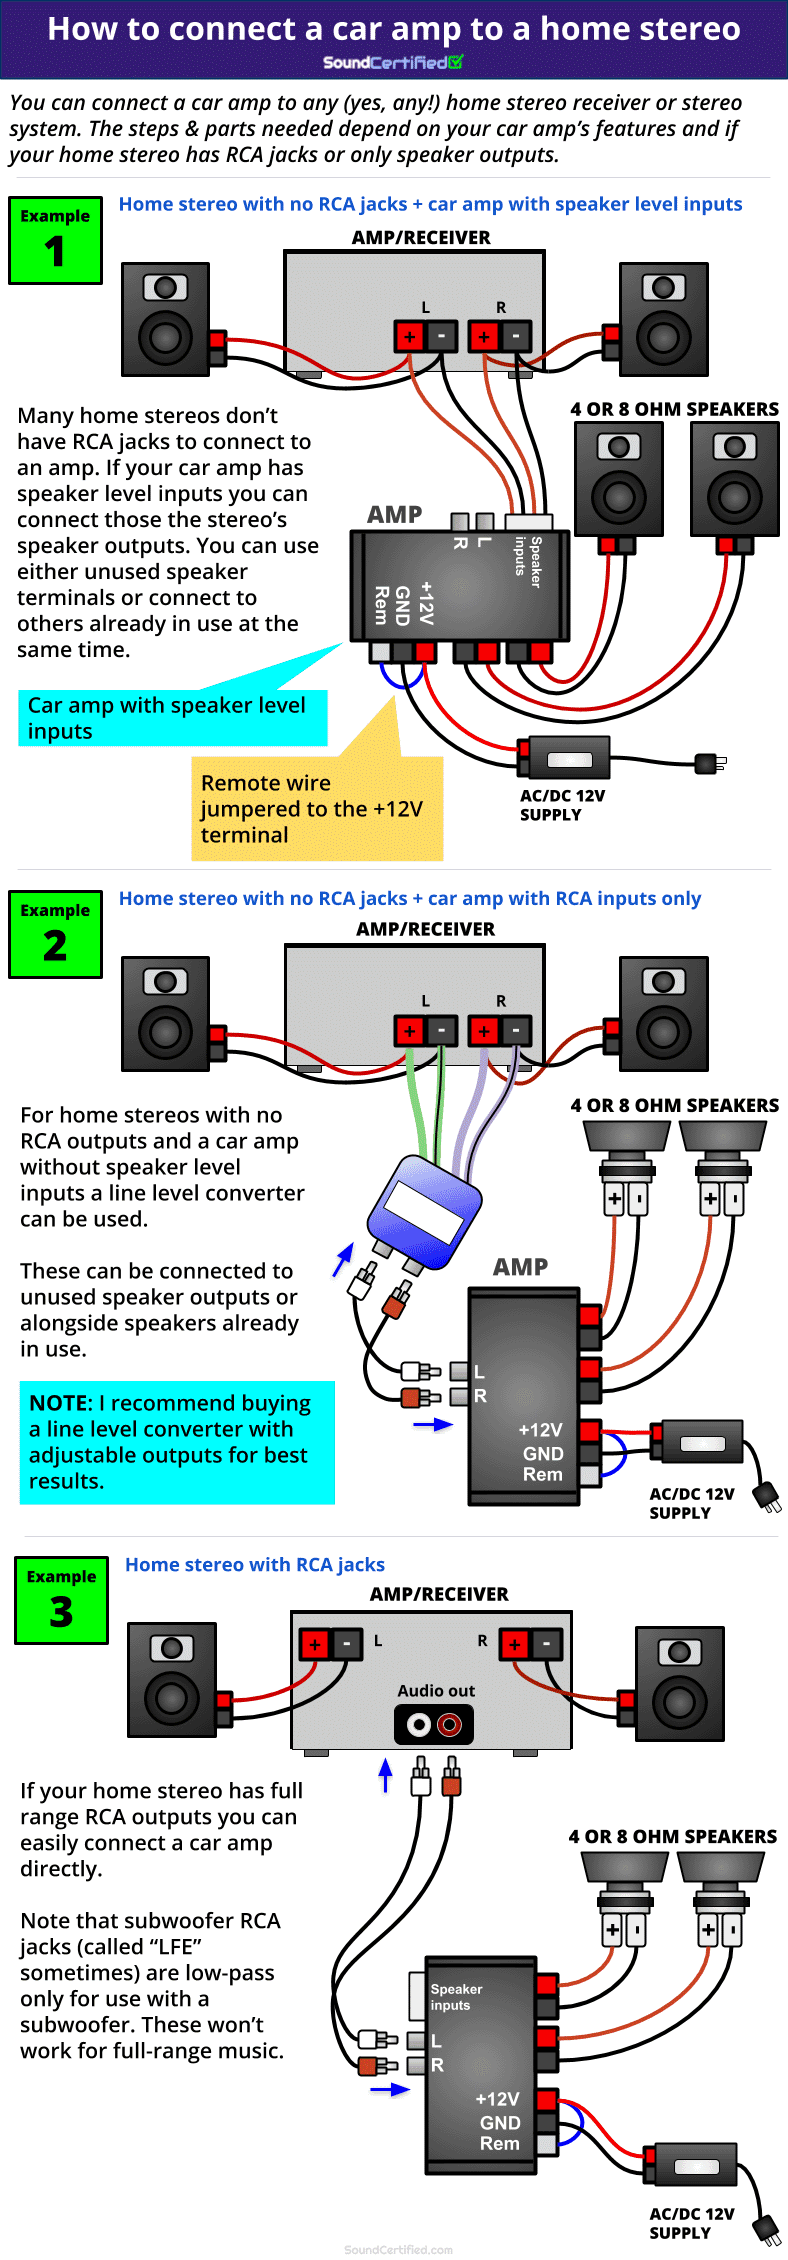 How to connect a car amp to a home stereo diagram